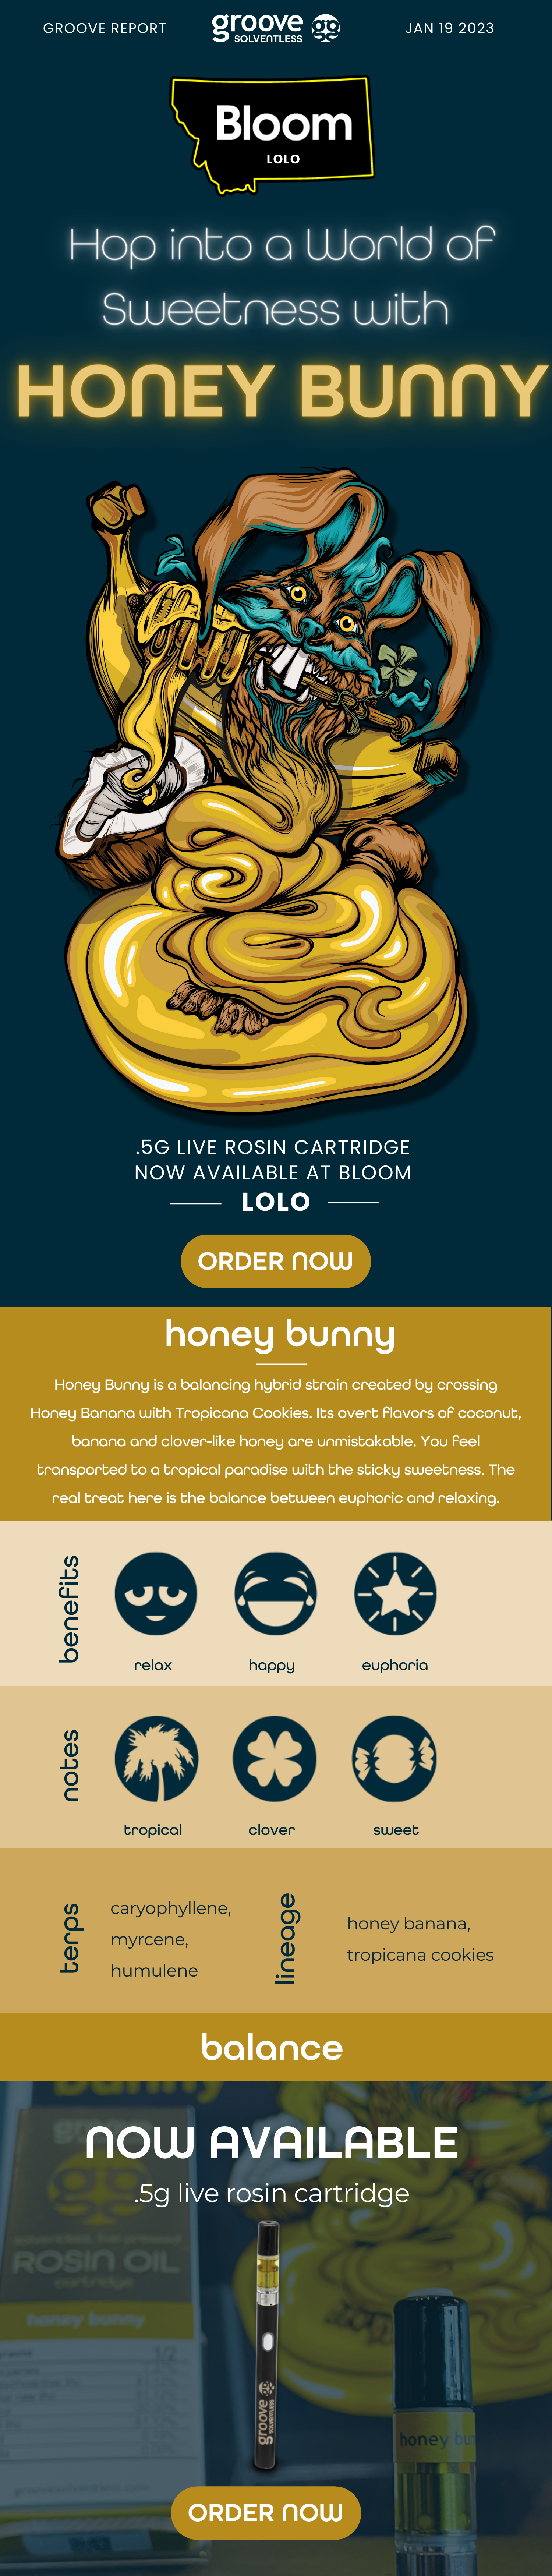 Honey Bunny Cartridge Now Available Bloom Lolo